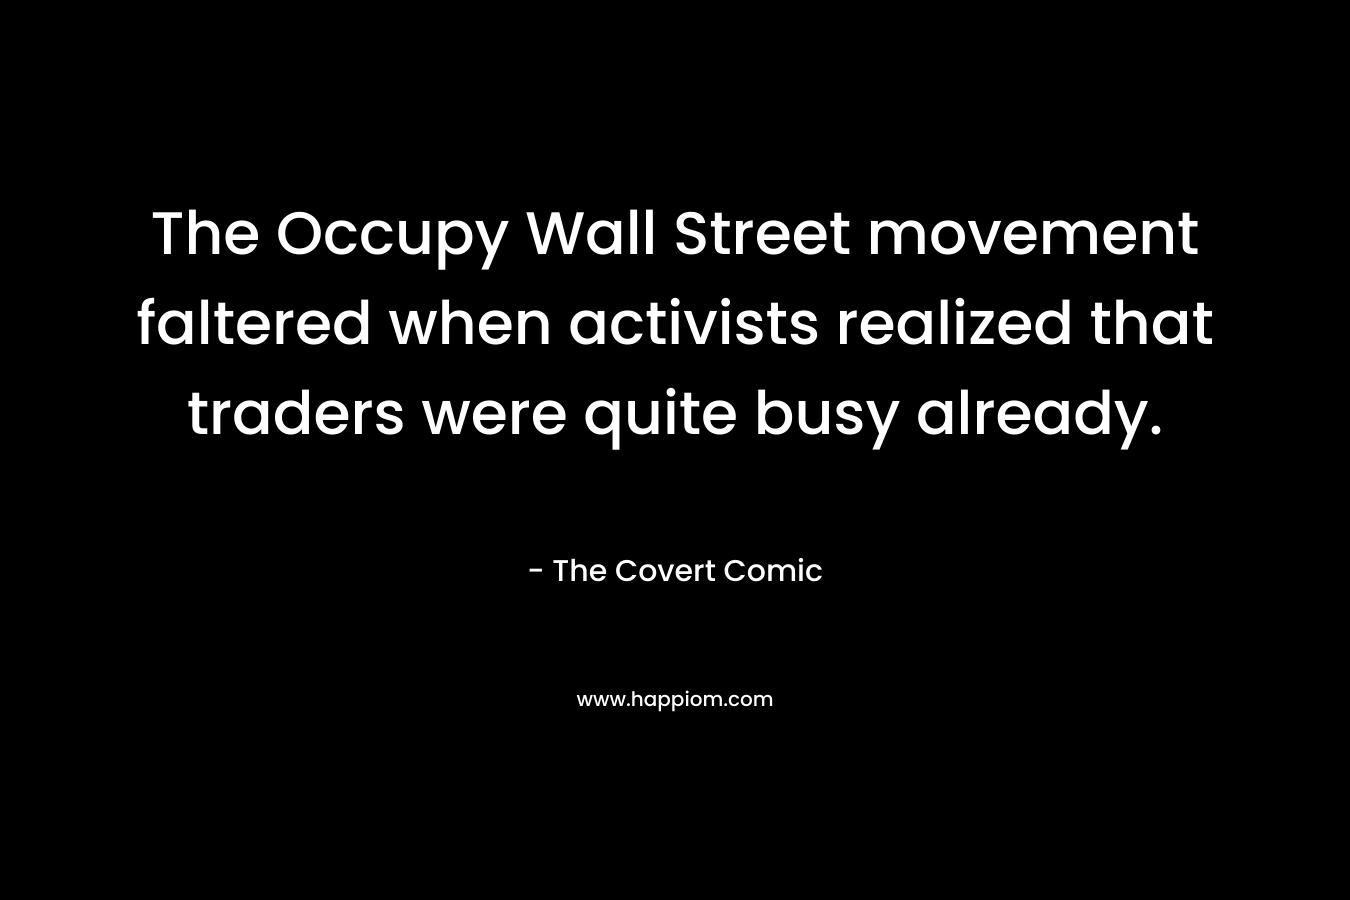 The Occupy Wall Street movement faltered when activists realized that traders were quite busy already. – The Covert Comic